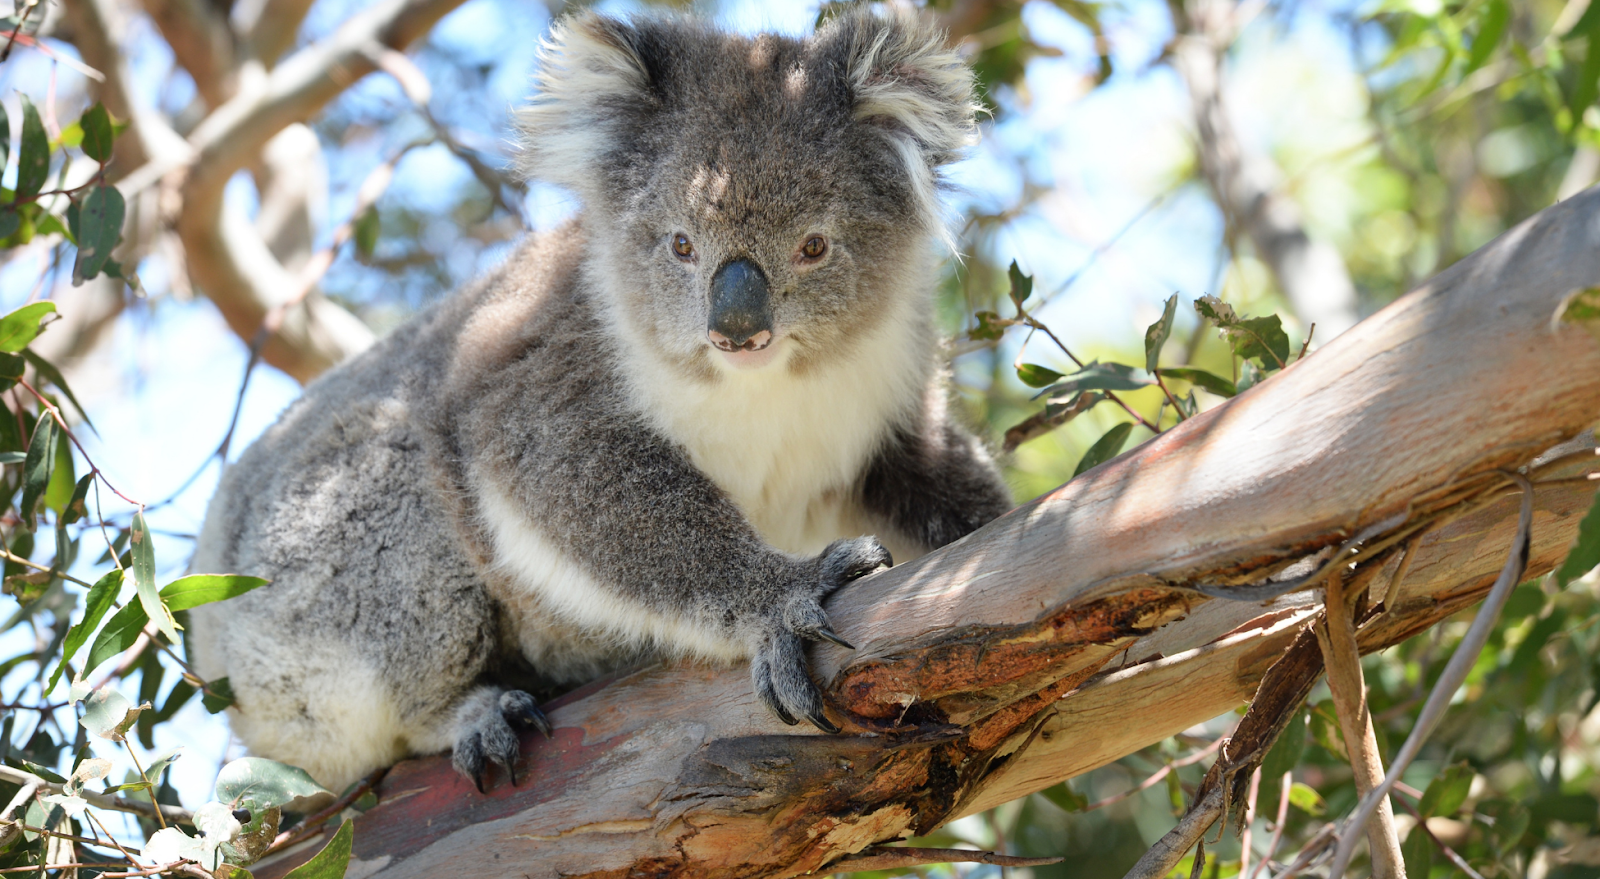 A to Z Bucket List - view of koala in a tree at the Queensland's Lone Pine Koala Sanctuary